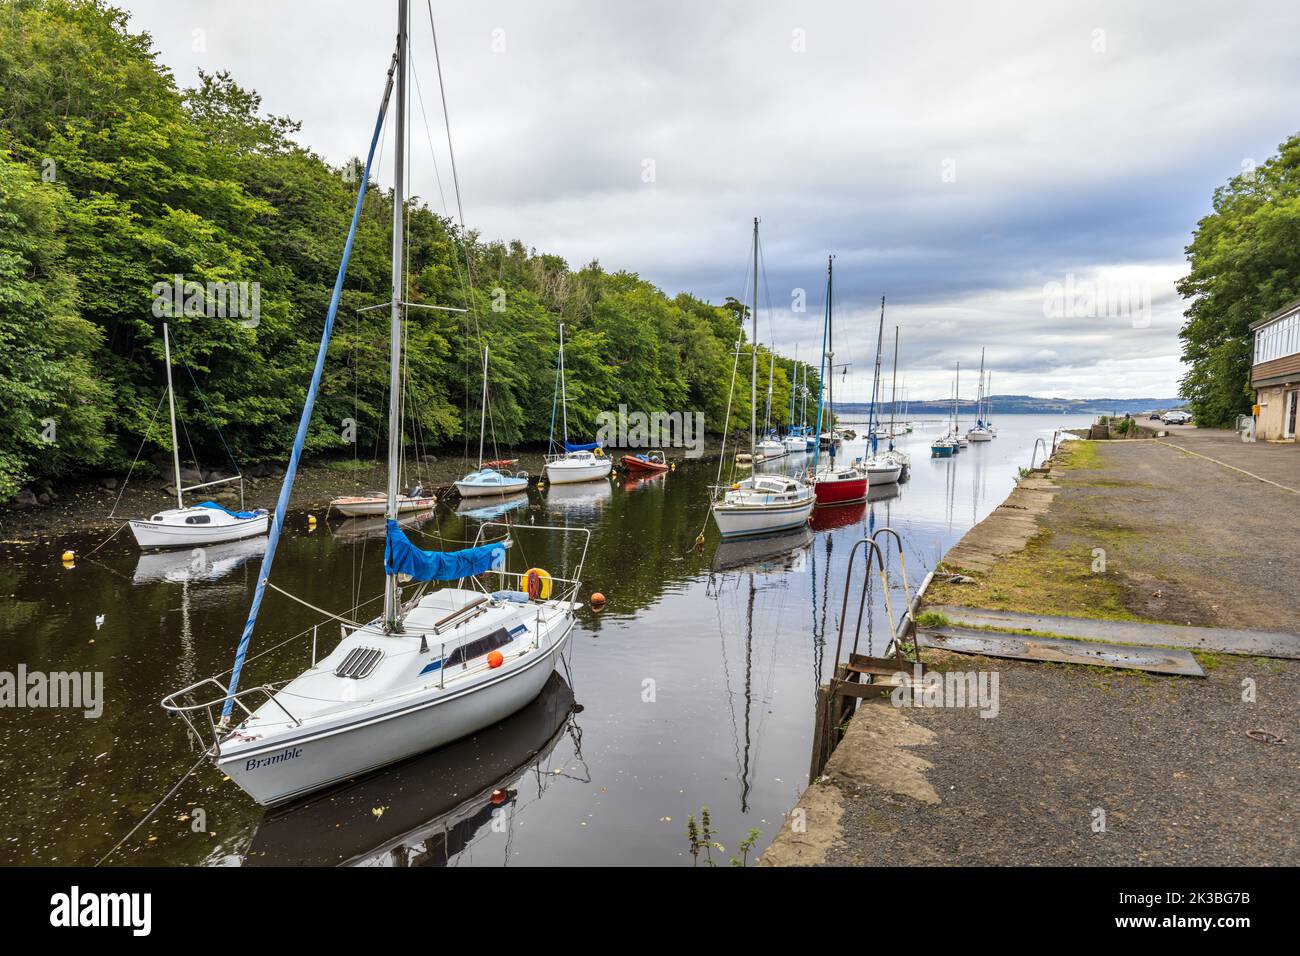 Small boats and yachts moored at the mouth of the River Almond at Cramond near Edinburgh, Scotland. Stock Photo